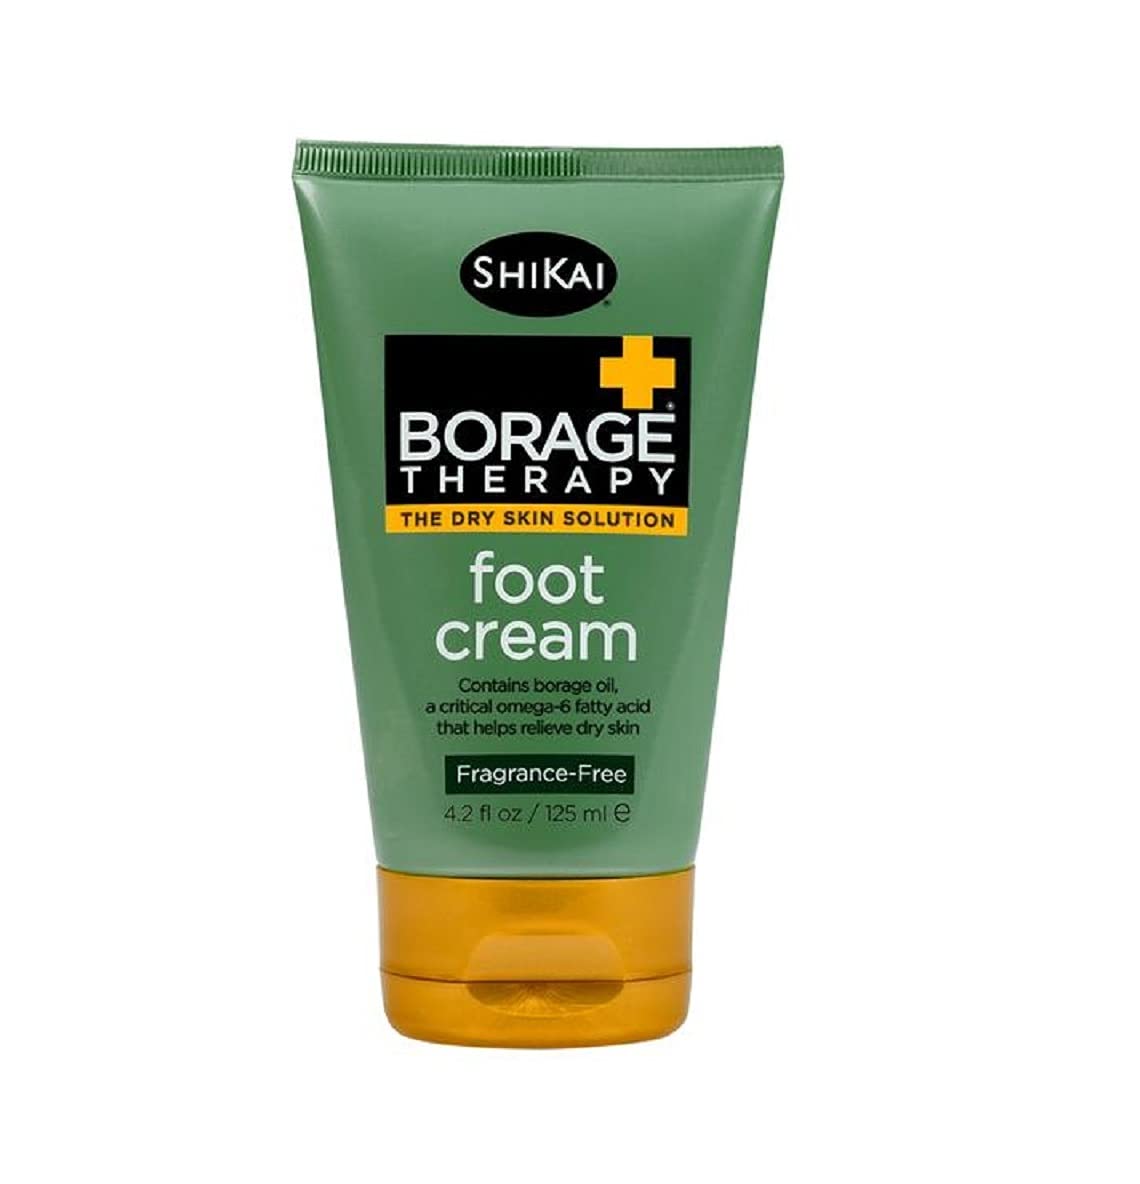 Shikai - Borage Therapy Plant-Based Dry Skin Foot Cream, Combat Dry, Cracked & Flakey Skin On Feet & Lower Legs, Good For Dry Skin Caused By Diabetes, Non-Greasy (Unscented, 4.2 Ounces)